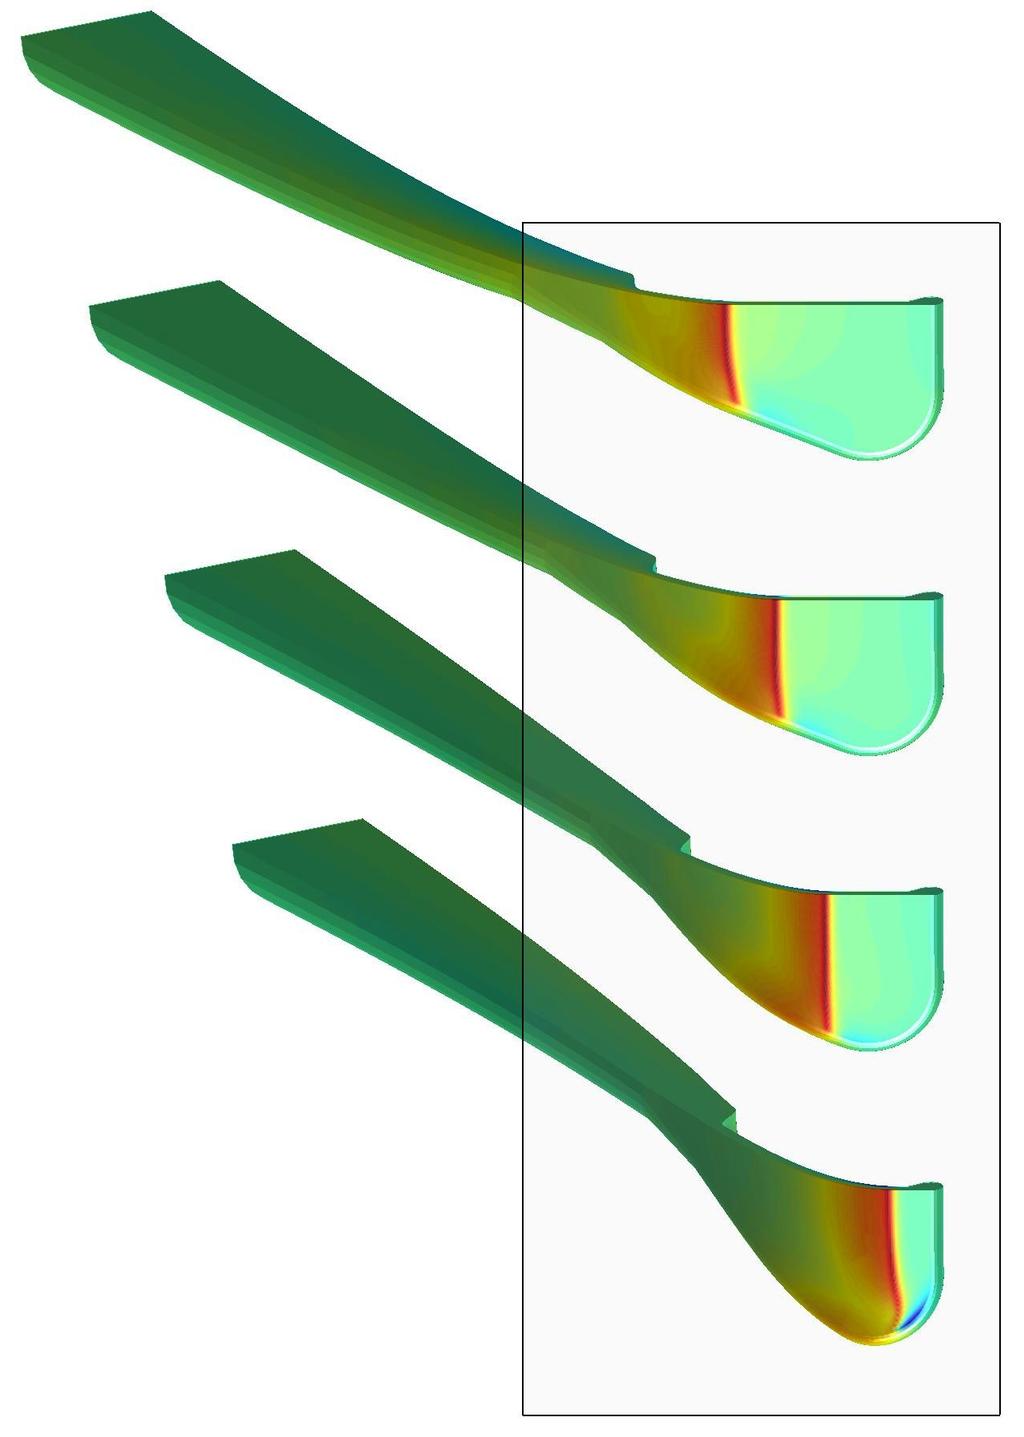 Figure 7: Spatula deformation for an applied vertical pull-off displacement u z considering a fixed shaft inclination of θ y = 60. The colorscale shows I 1 = tr σ normalized by E.